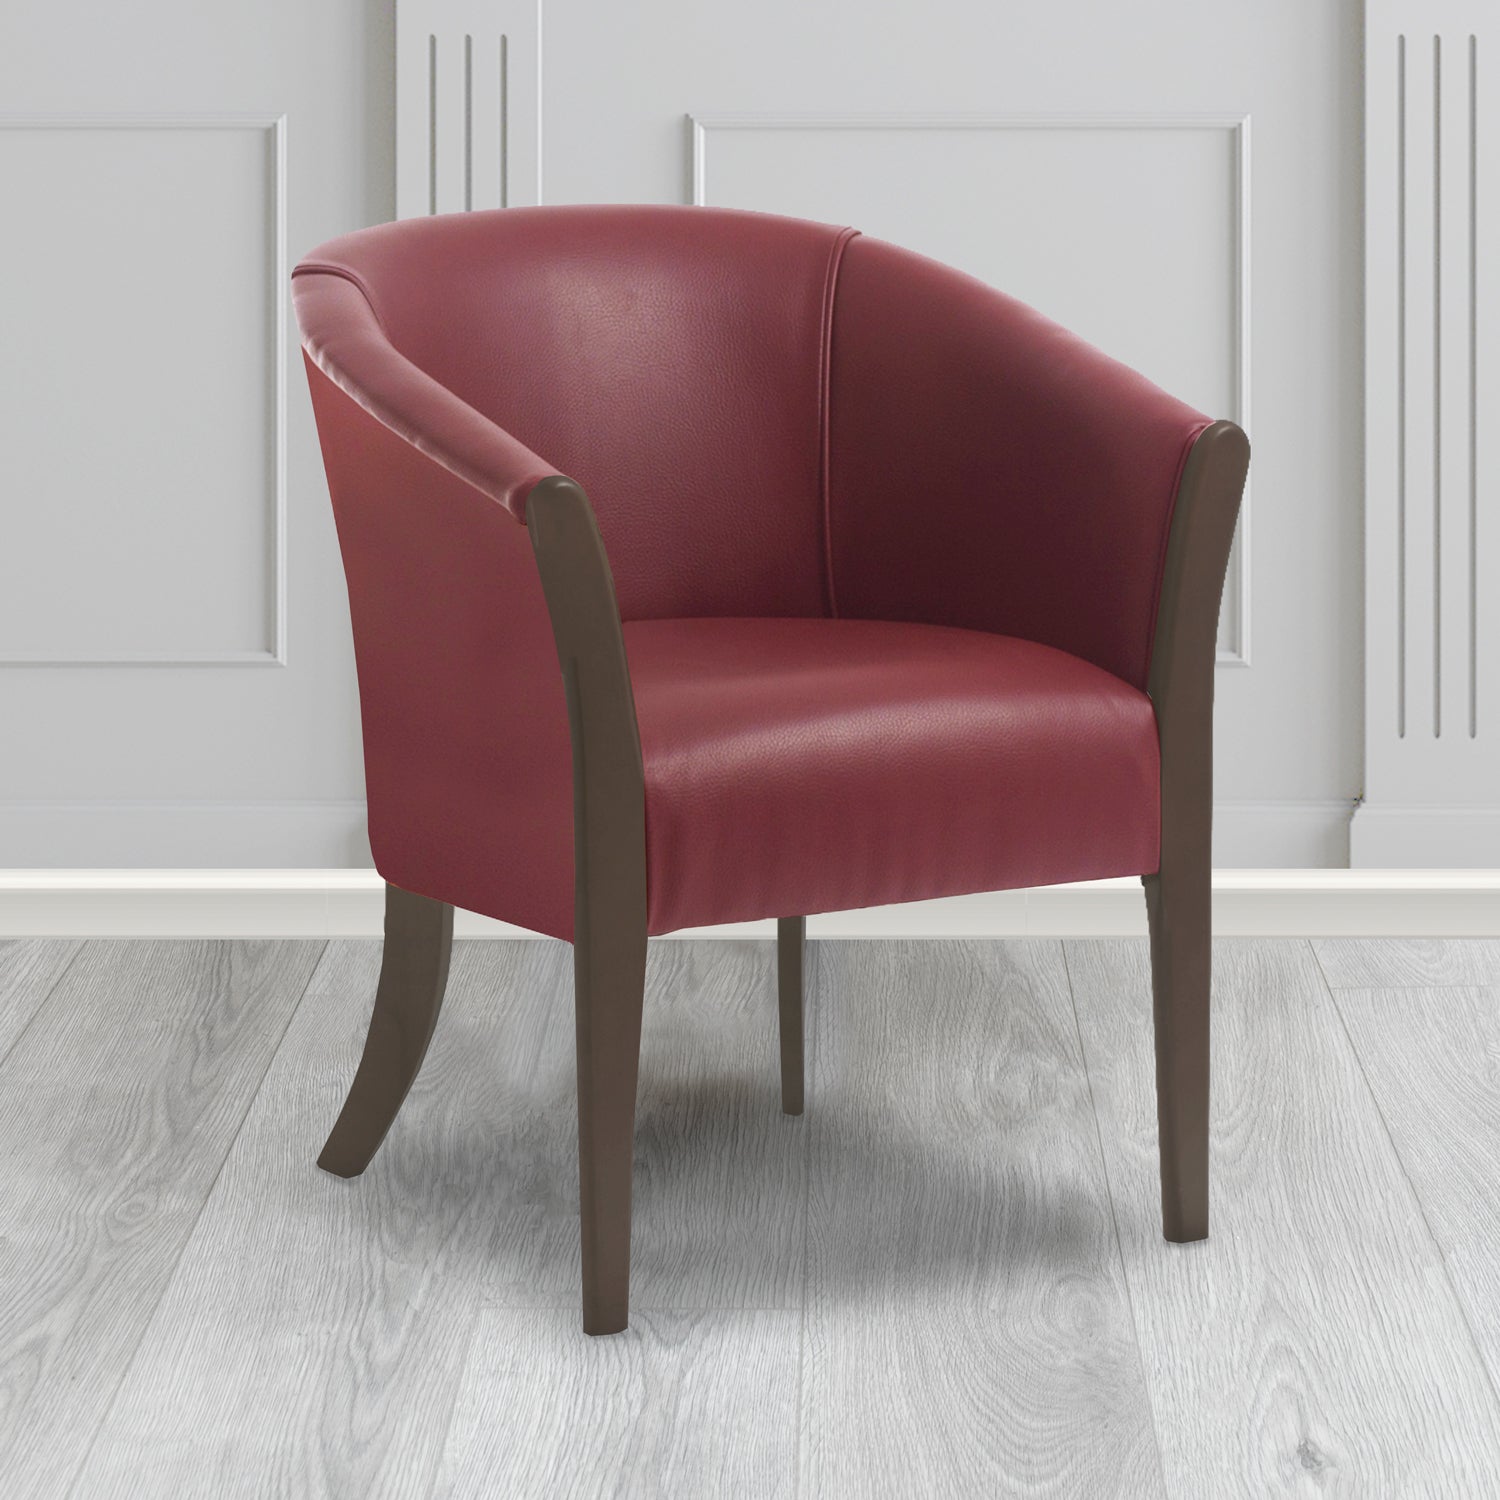 Hamilton Tub Chair in Agua Paint Pot Claret Crib 5 Faux Leather - Antimicrobial, Stain Resistant & Waterproof - The Tub Chair Shop